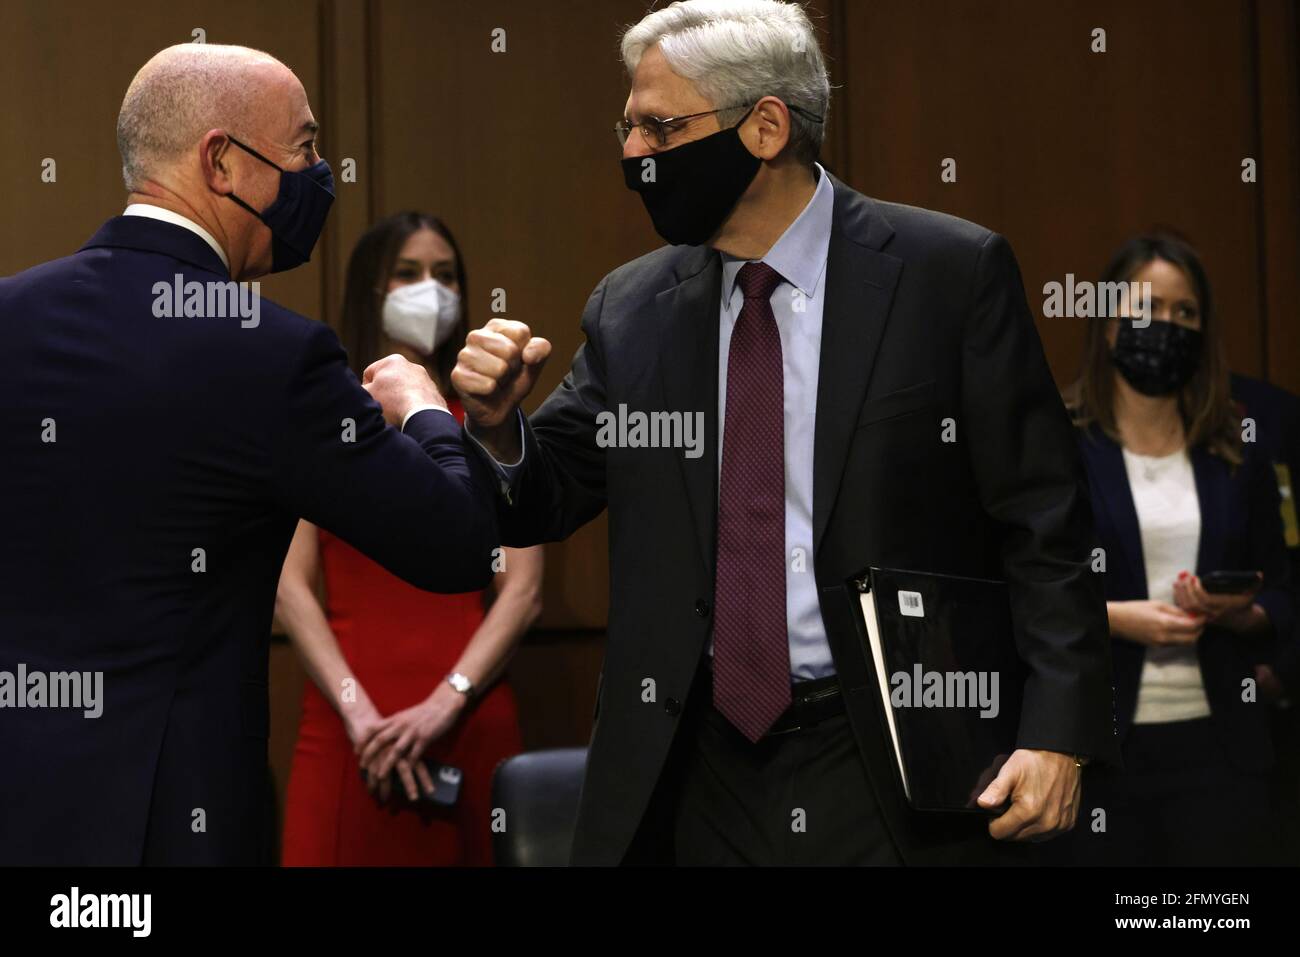 Washington, USA. 12th May, 2021. WASHINGTON, DC - MAY 12: U.S. Attorney General Merrick Garland (L) greets Homeland Security Secretary Alejandro Mayorkas (R) prior to a hearing before the Senate Appropriations Committee at Hart Senate Office Building on May 12, 2021 on Capitol Hill in Washington, DC. The committee held a hearing on “Domestic Violent Extremism in America.” (Photo by Alex Wong/Pool/Sipa USA) Credit: Sipa USA/Alamy Live News Stock Photo